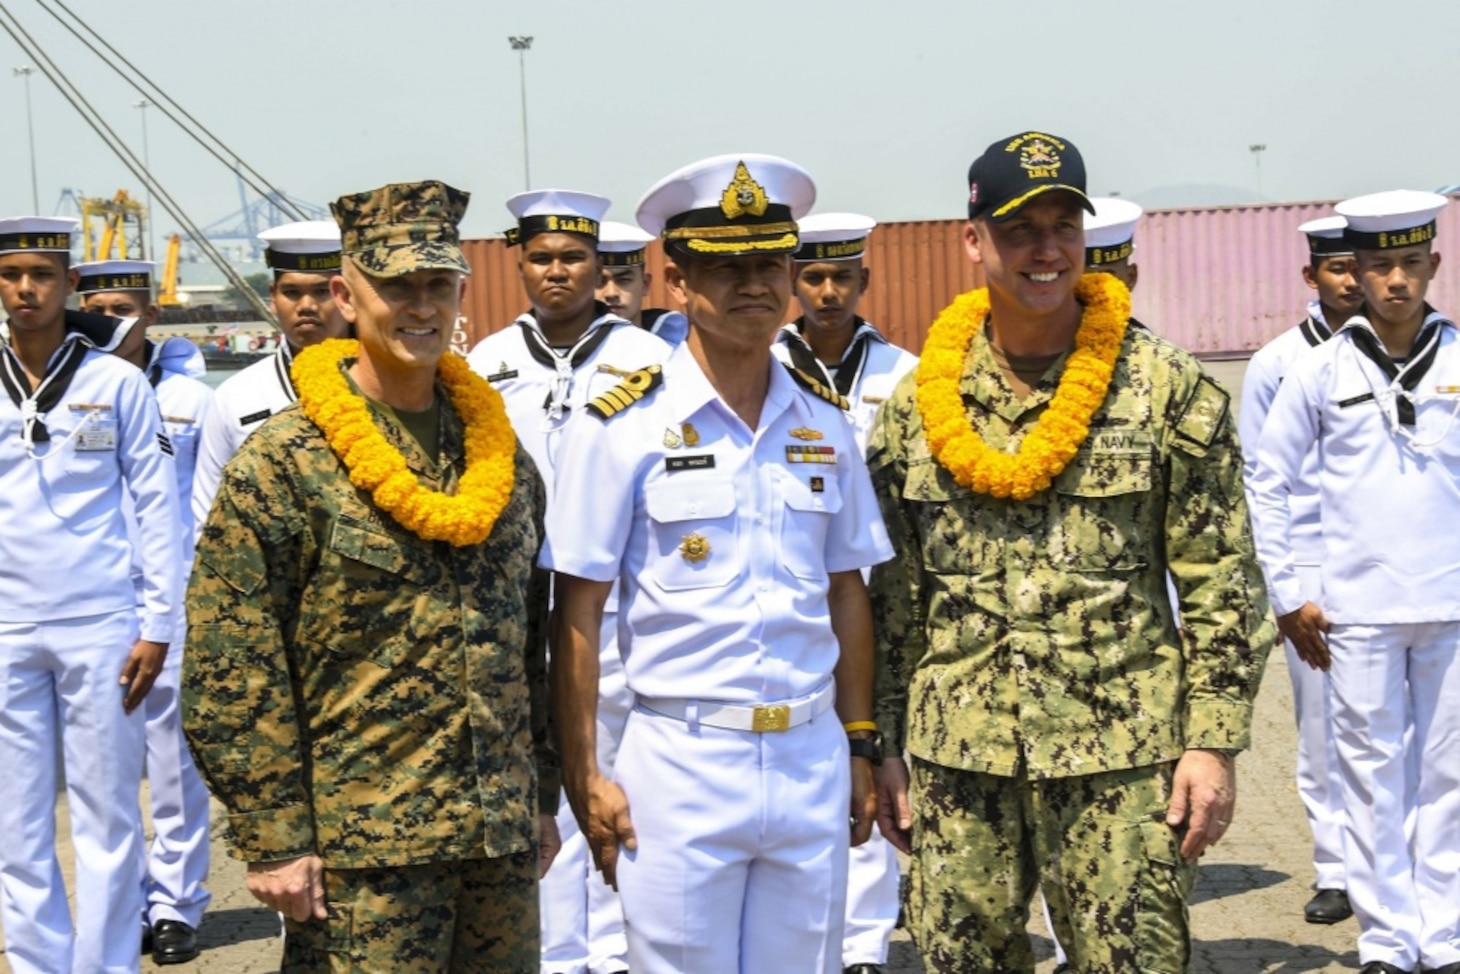 LAEM CHABANG, Thailand (Feb. 22, 2020) Col. Robert Brodie, commanding officer, 31st Marine Expeditionary Unit (MEU), left, Commander, Amphibious Task Force, Royal Thai Navy Capt. Arpa Chapanon and Capt. Luke Frost, commanding officer, amphibious assault ship USS America (LHA 6) pose during a reception for the 31st MEU and America before the start of Exercise Cobra Gold 2020 (CG 20). The America Expeditionary Strike Group-31st MEU team will participate in CG 20, the largest theater security cooperation exercise in the Indo-Pacific region and an integral part of the U.S. commitment to strengthen engagement in the region.